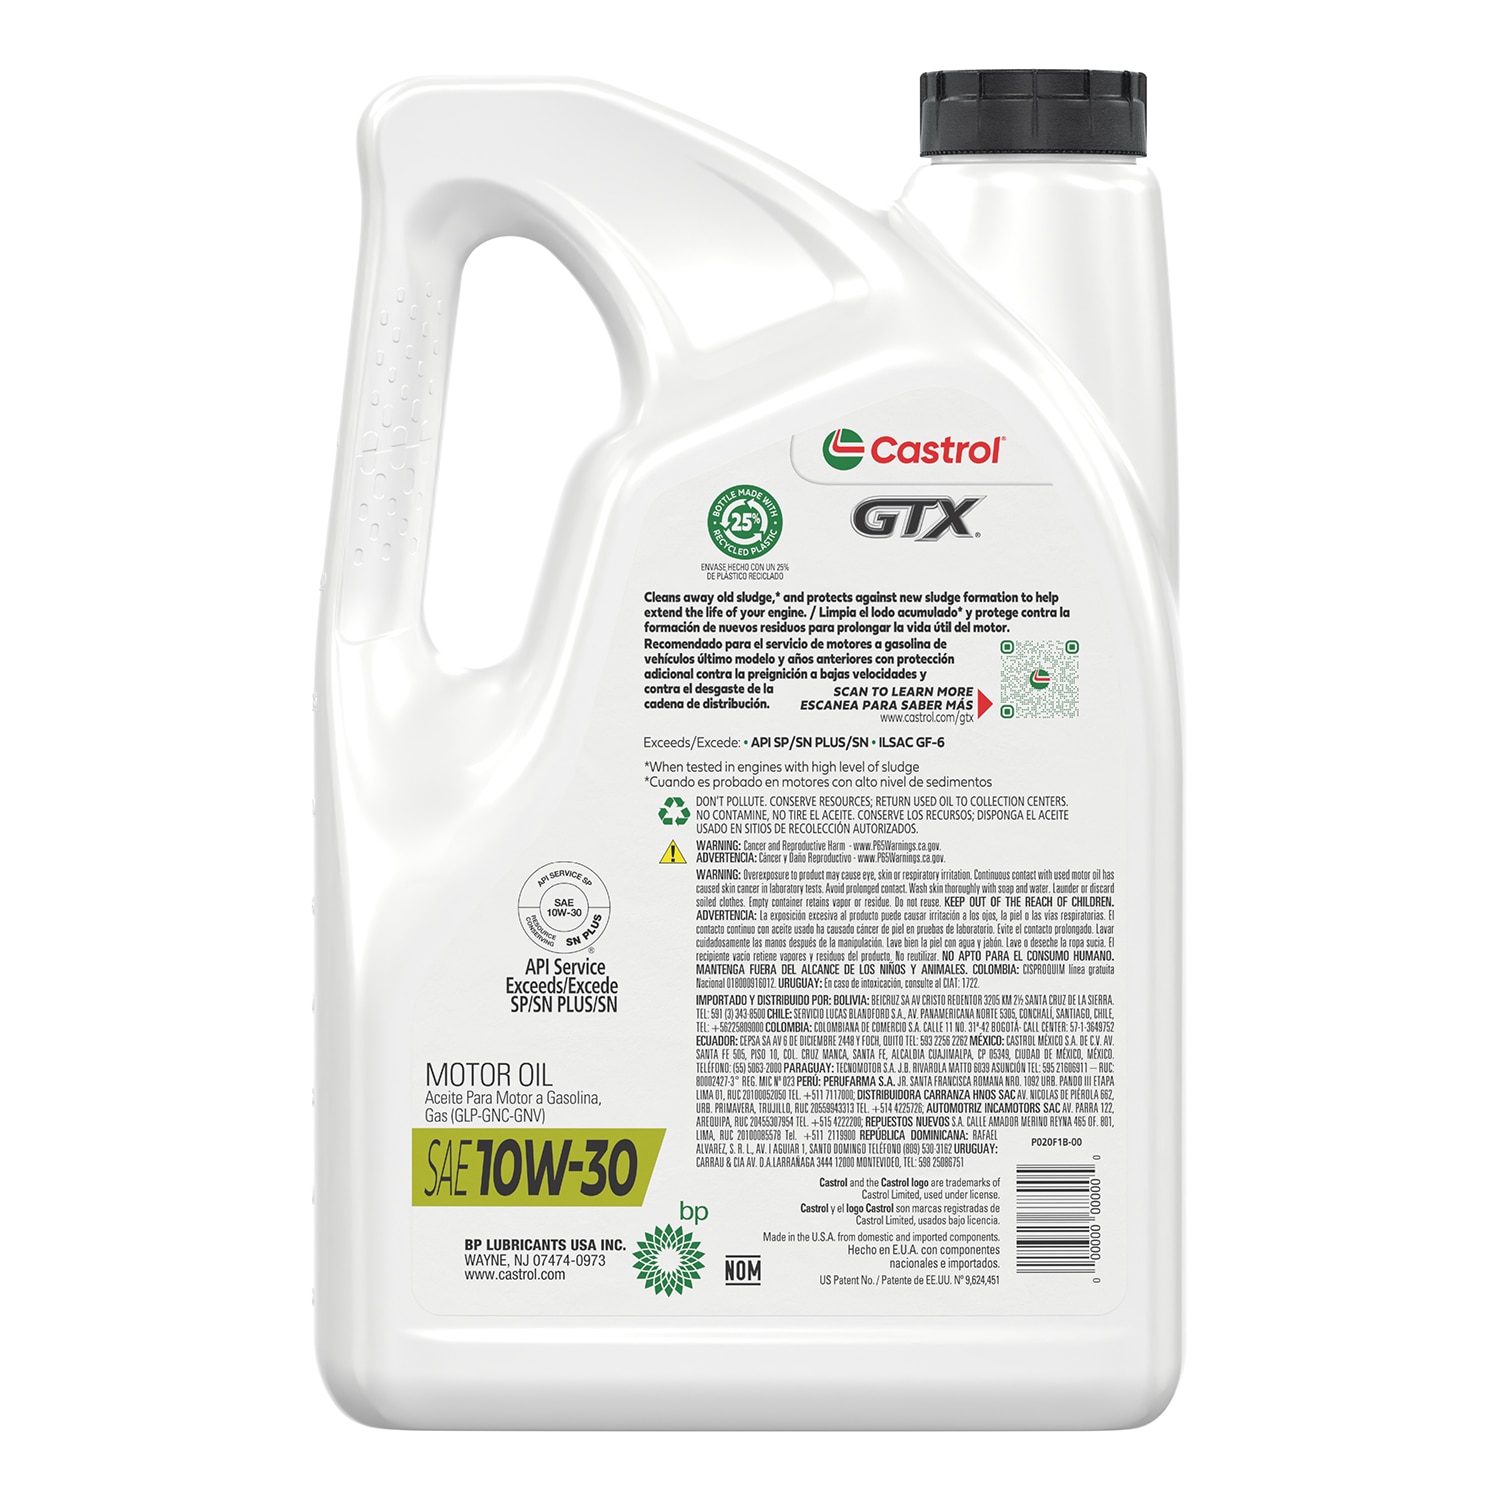 CASTROL Gtx Ultraclean 5w-30, 5 Qt in the Motor Oil & Additives 